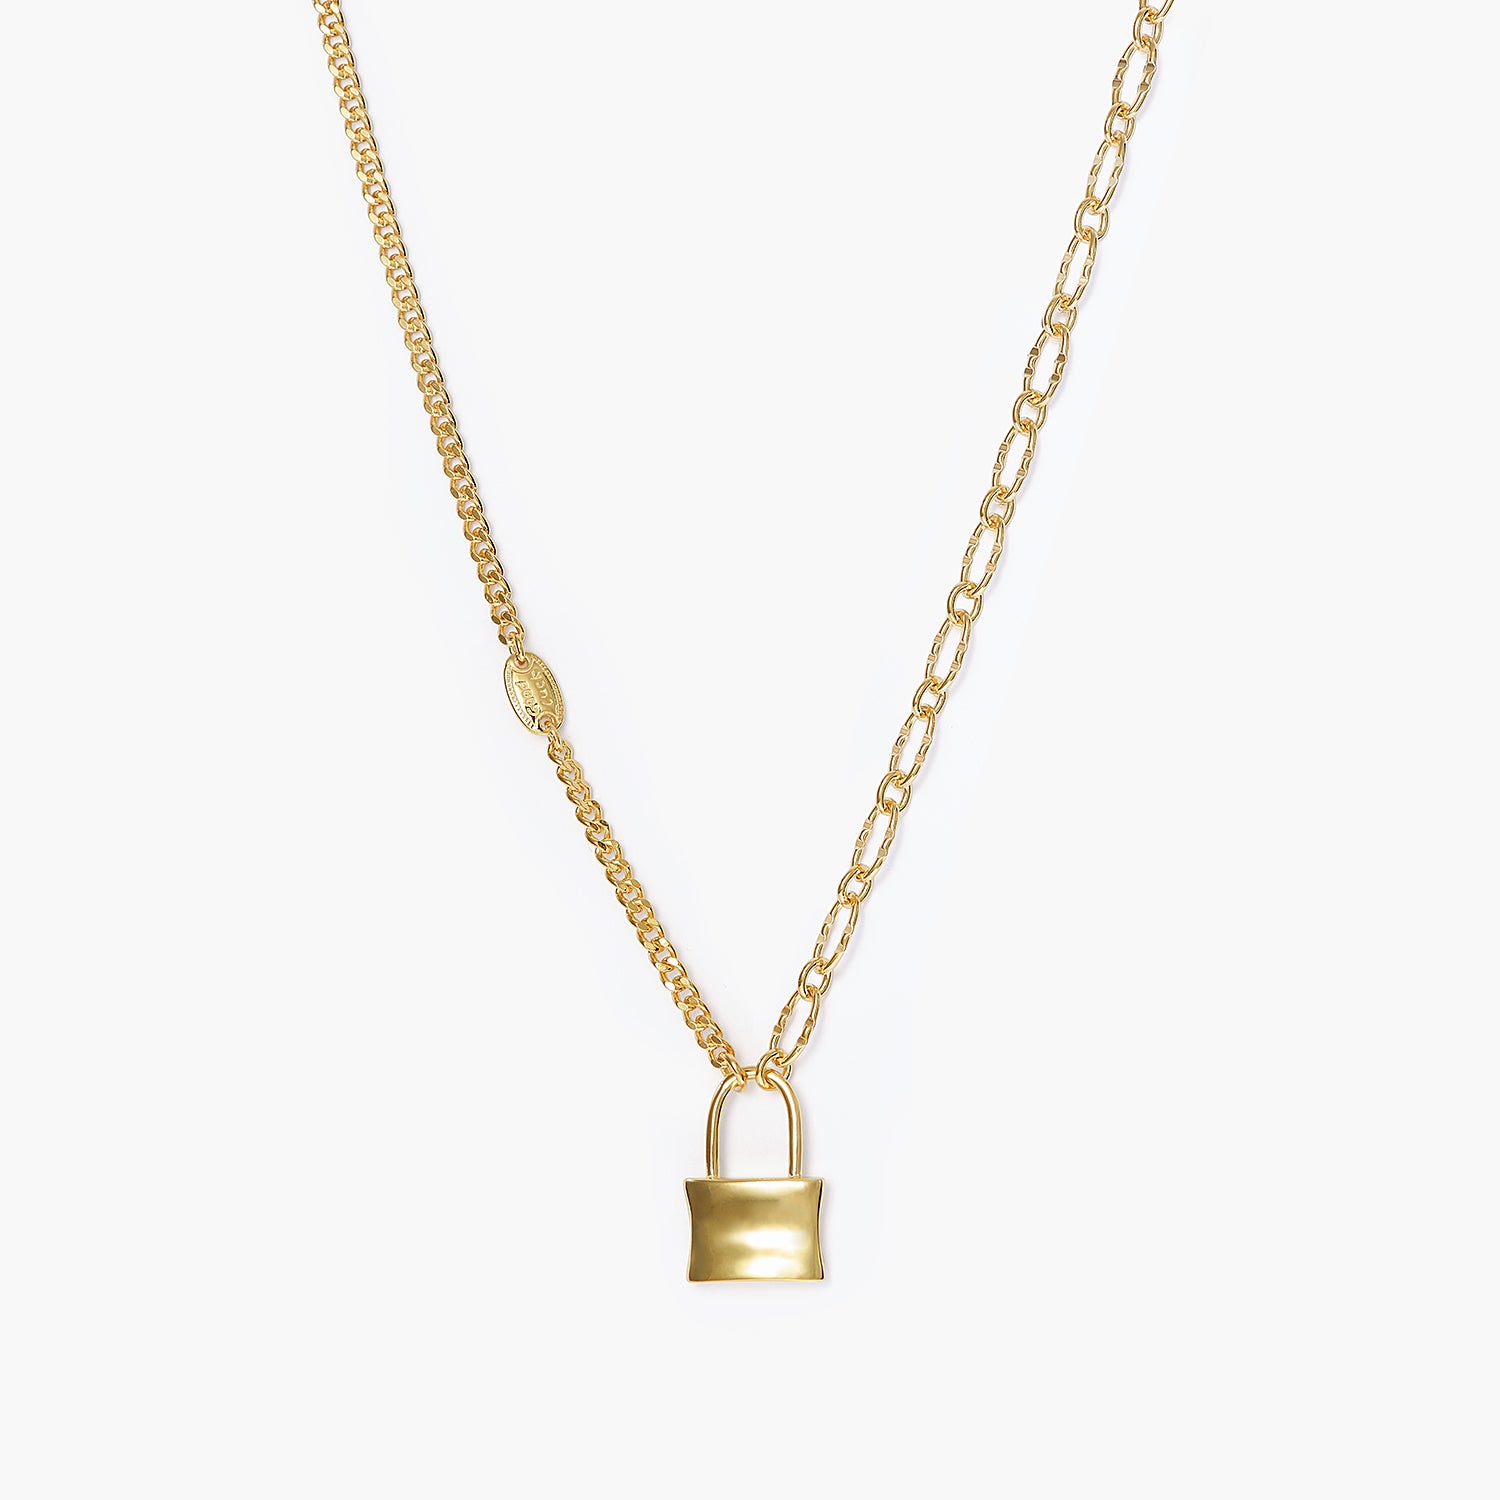 Oval Link Lock Chain Necklace